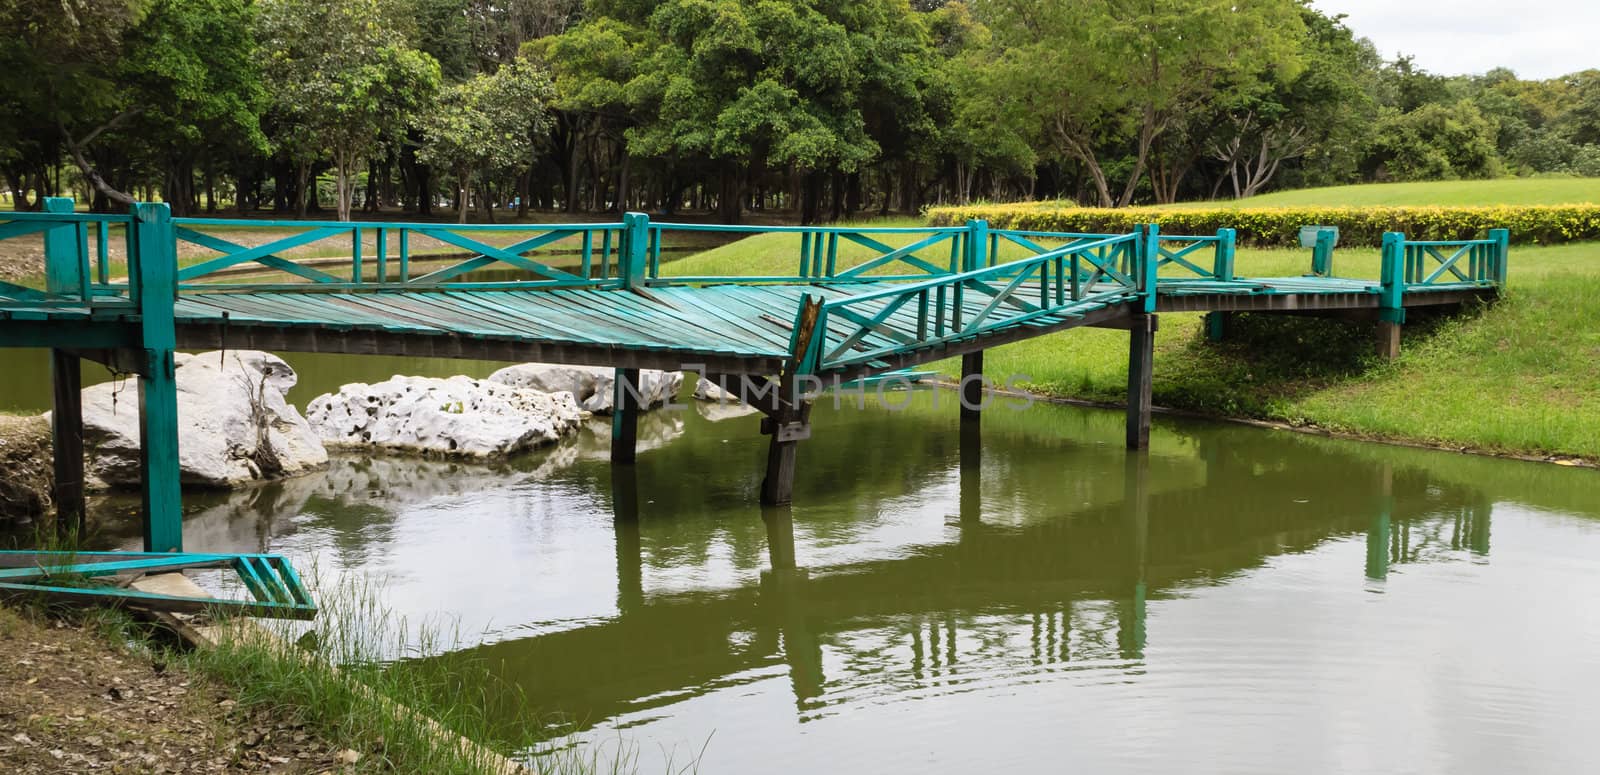 Old wooden green bridge collapses down the stream in the park.